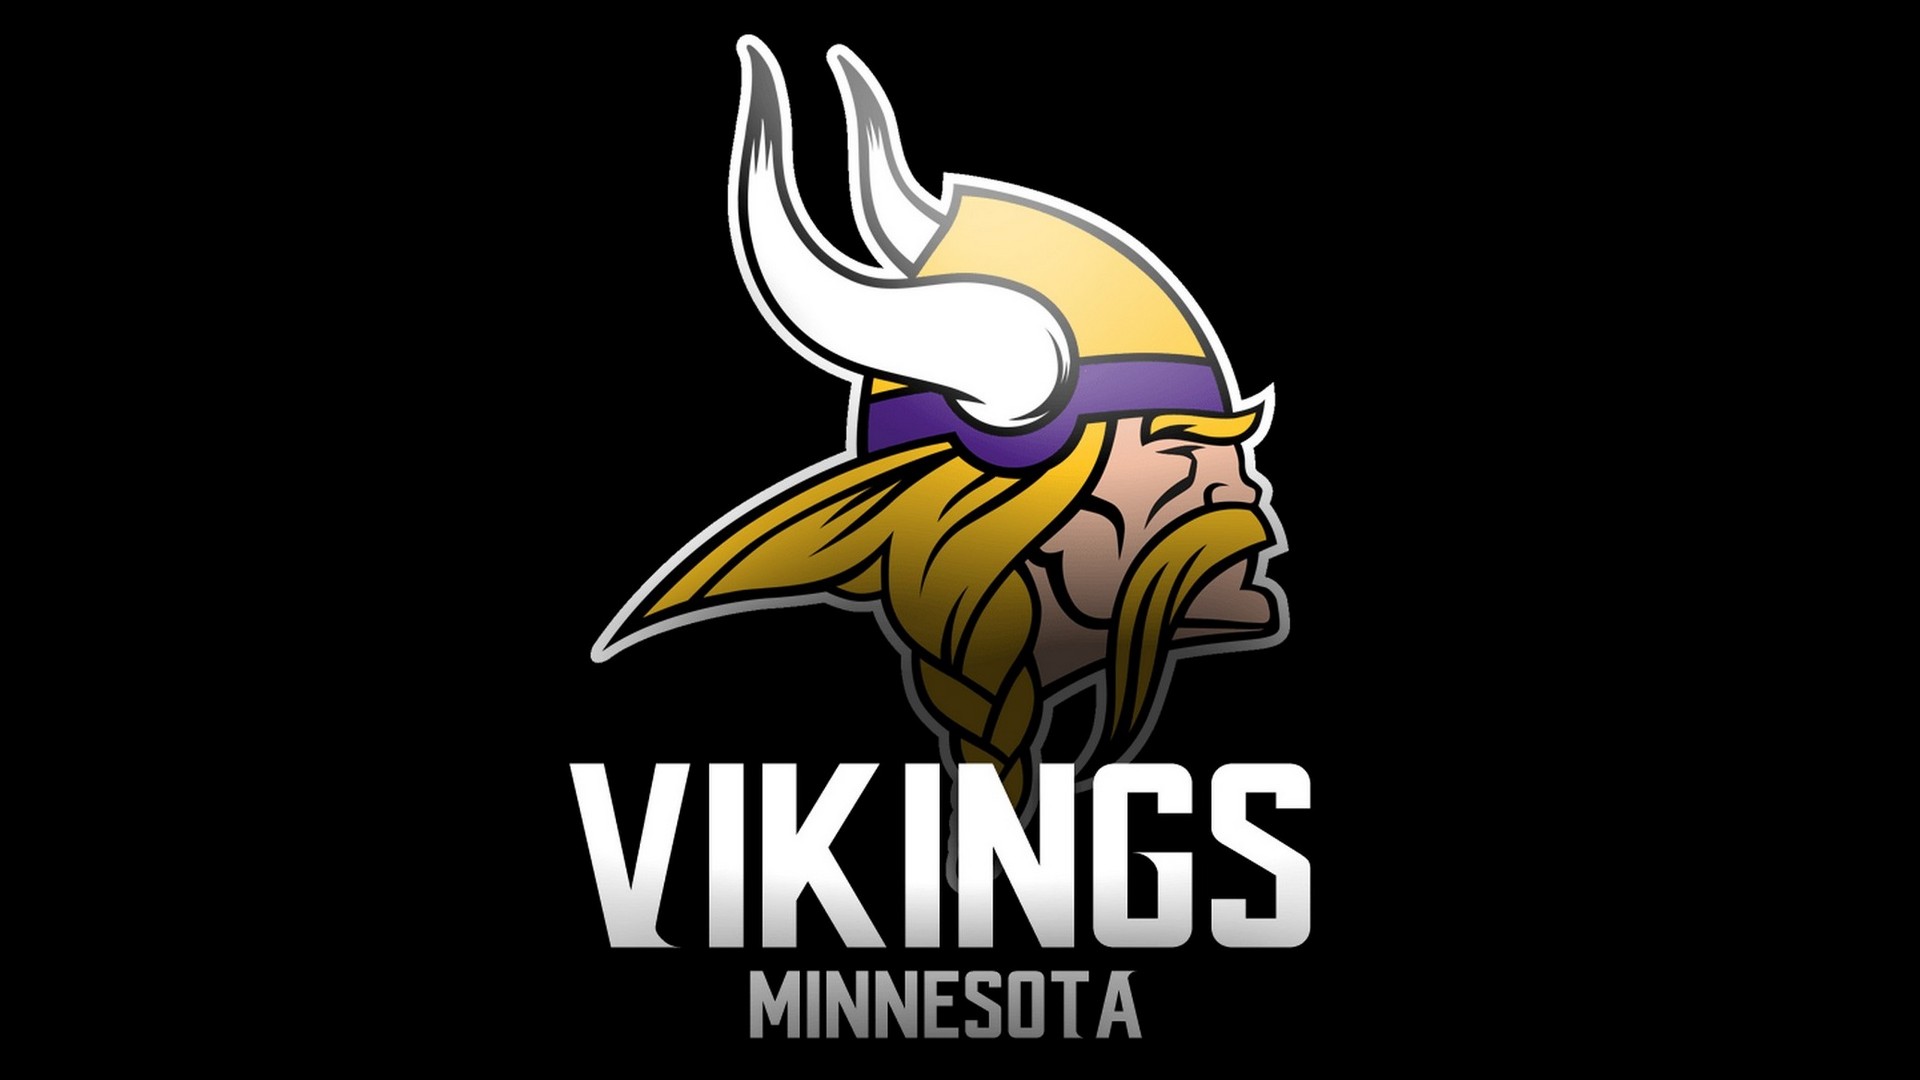 Minnesota Vikings NFL HD Wallpapers With high-resolution 1920X1080 pixel. You can use this wallpaper for your Mac or Windows Desktop Background, iPhone, Android or Tablet and another Smartphone device